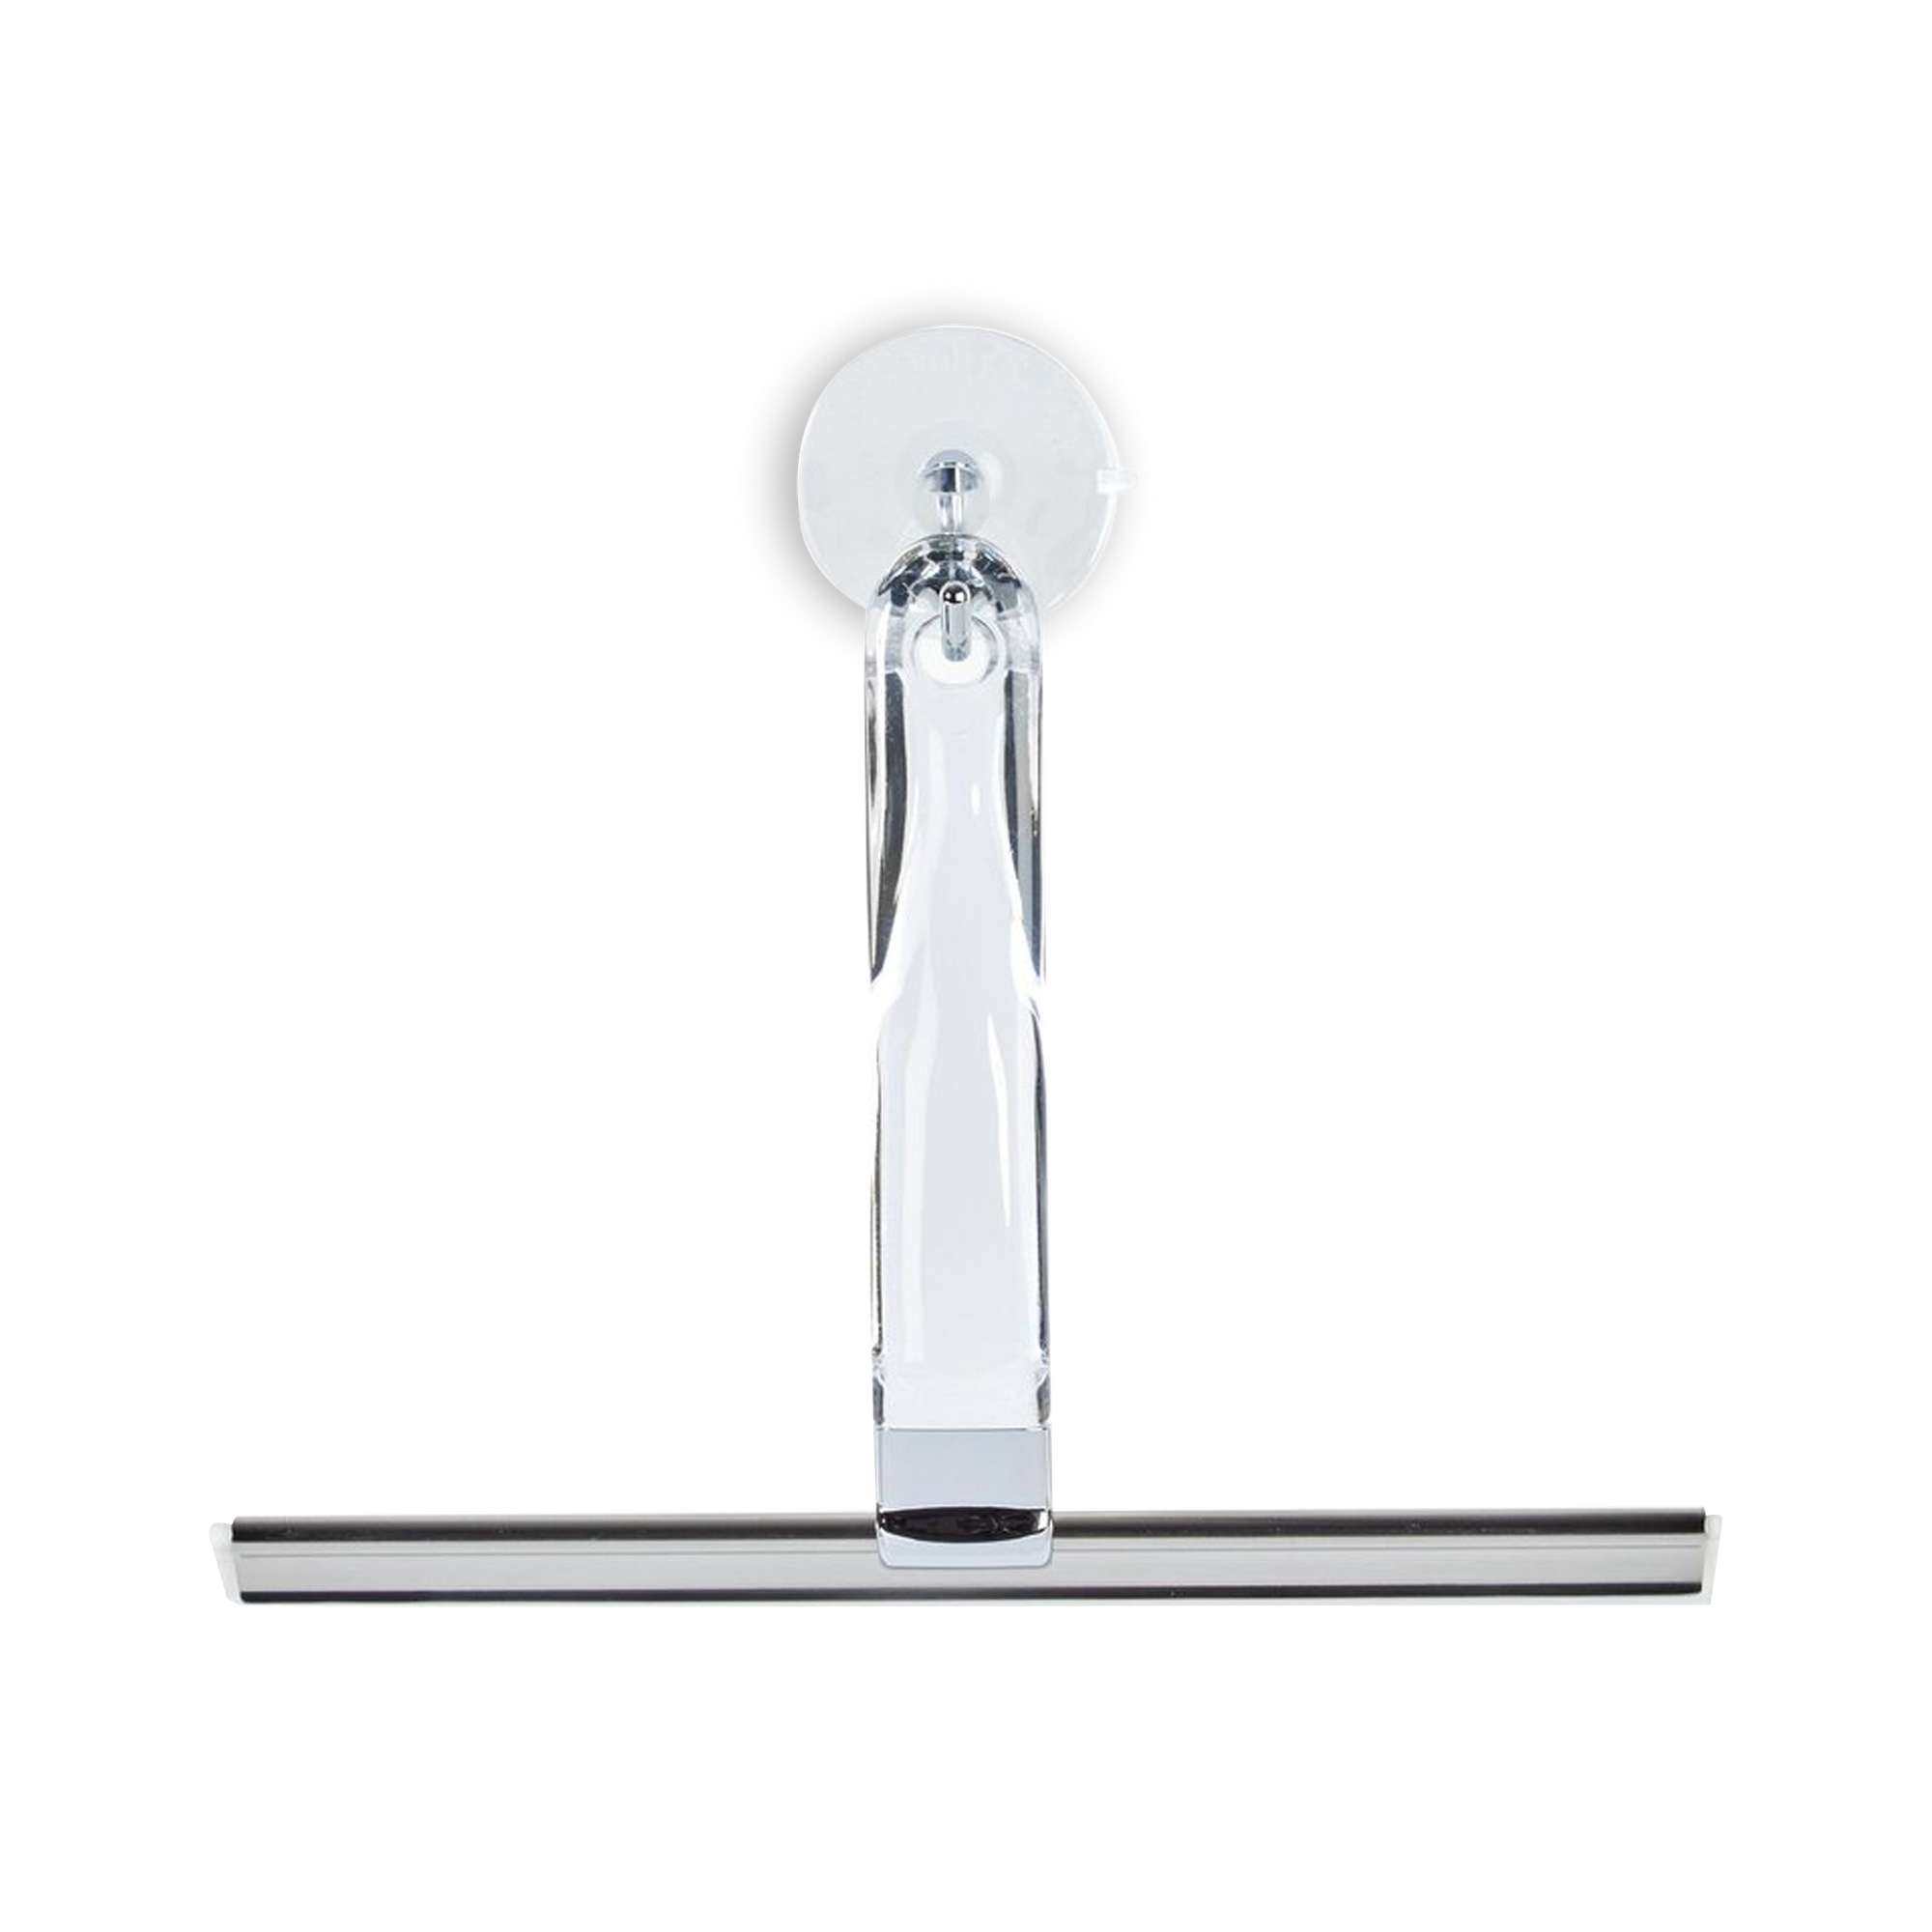 The Crystal clear squeegee has an ergonomically designed clear acrylic handle and will leave your tile surfaces clean and shower doors crystal clear without streaks.